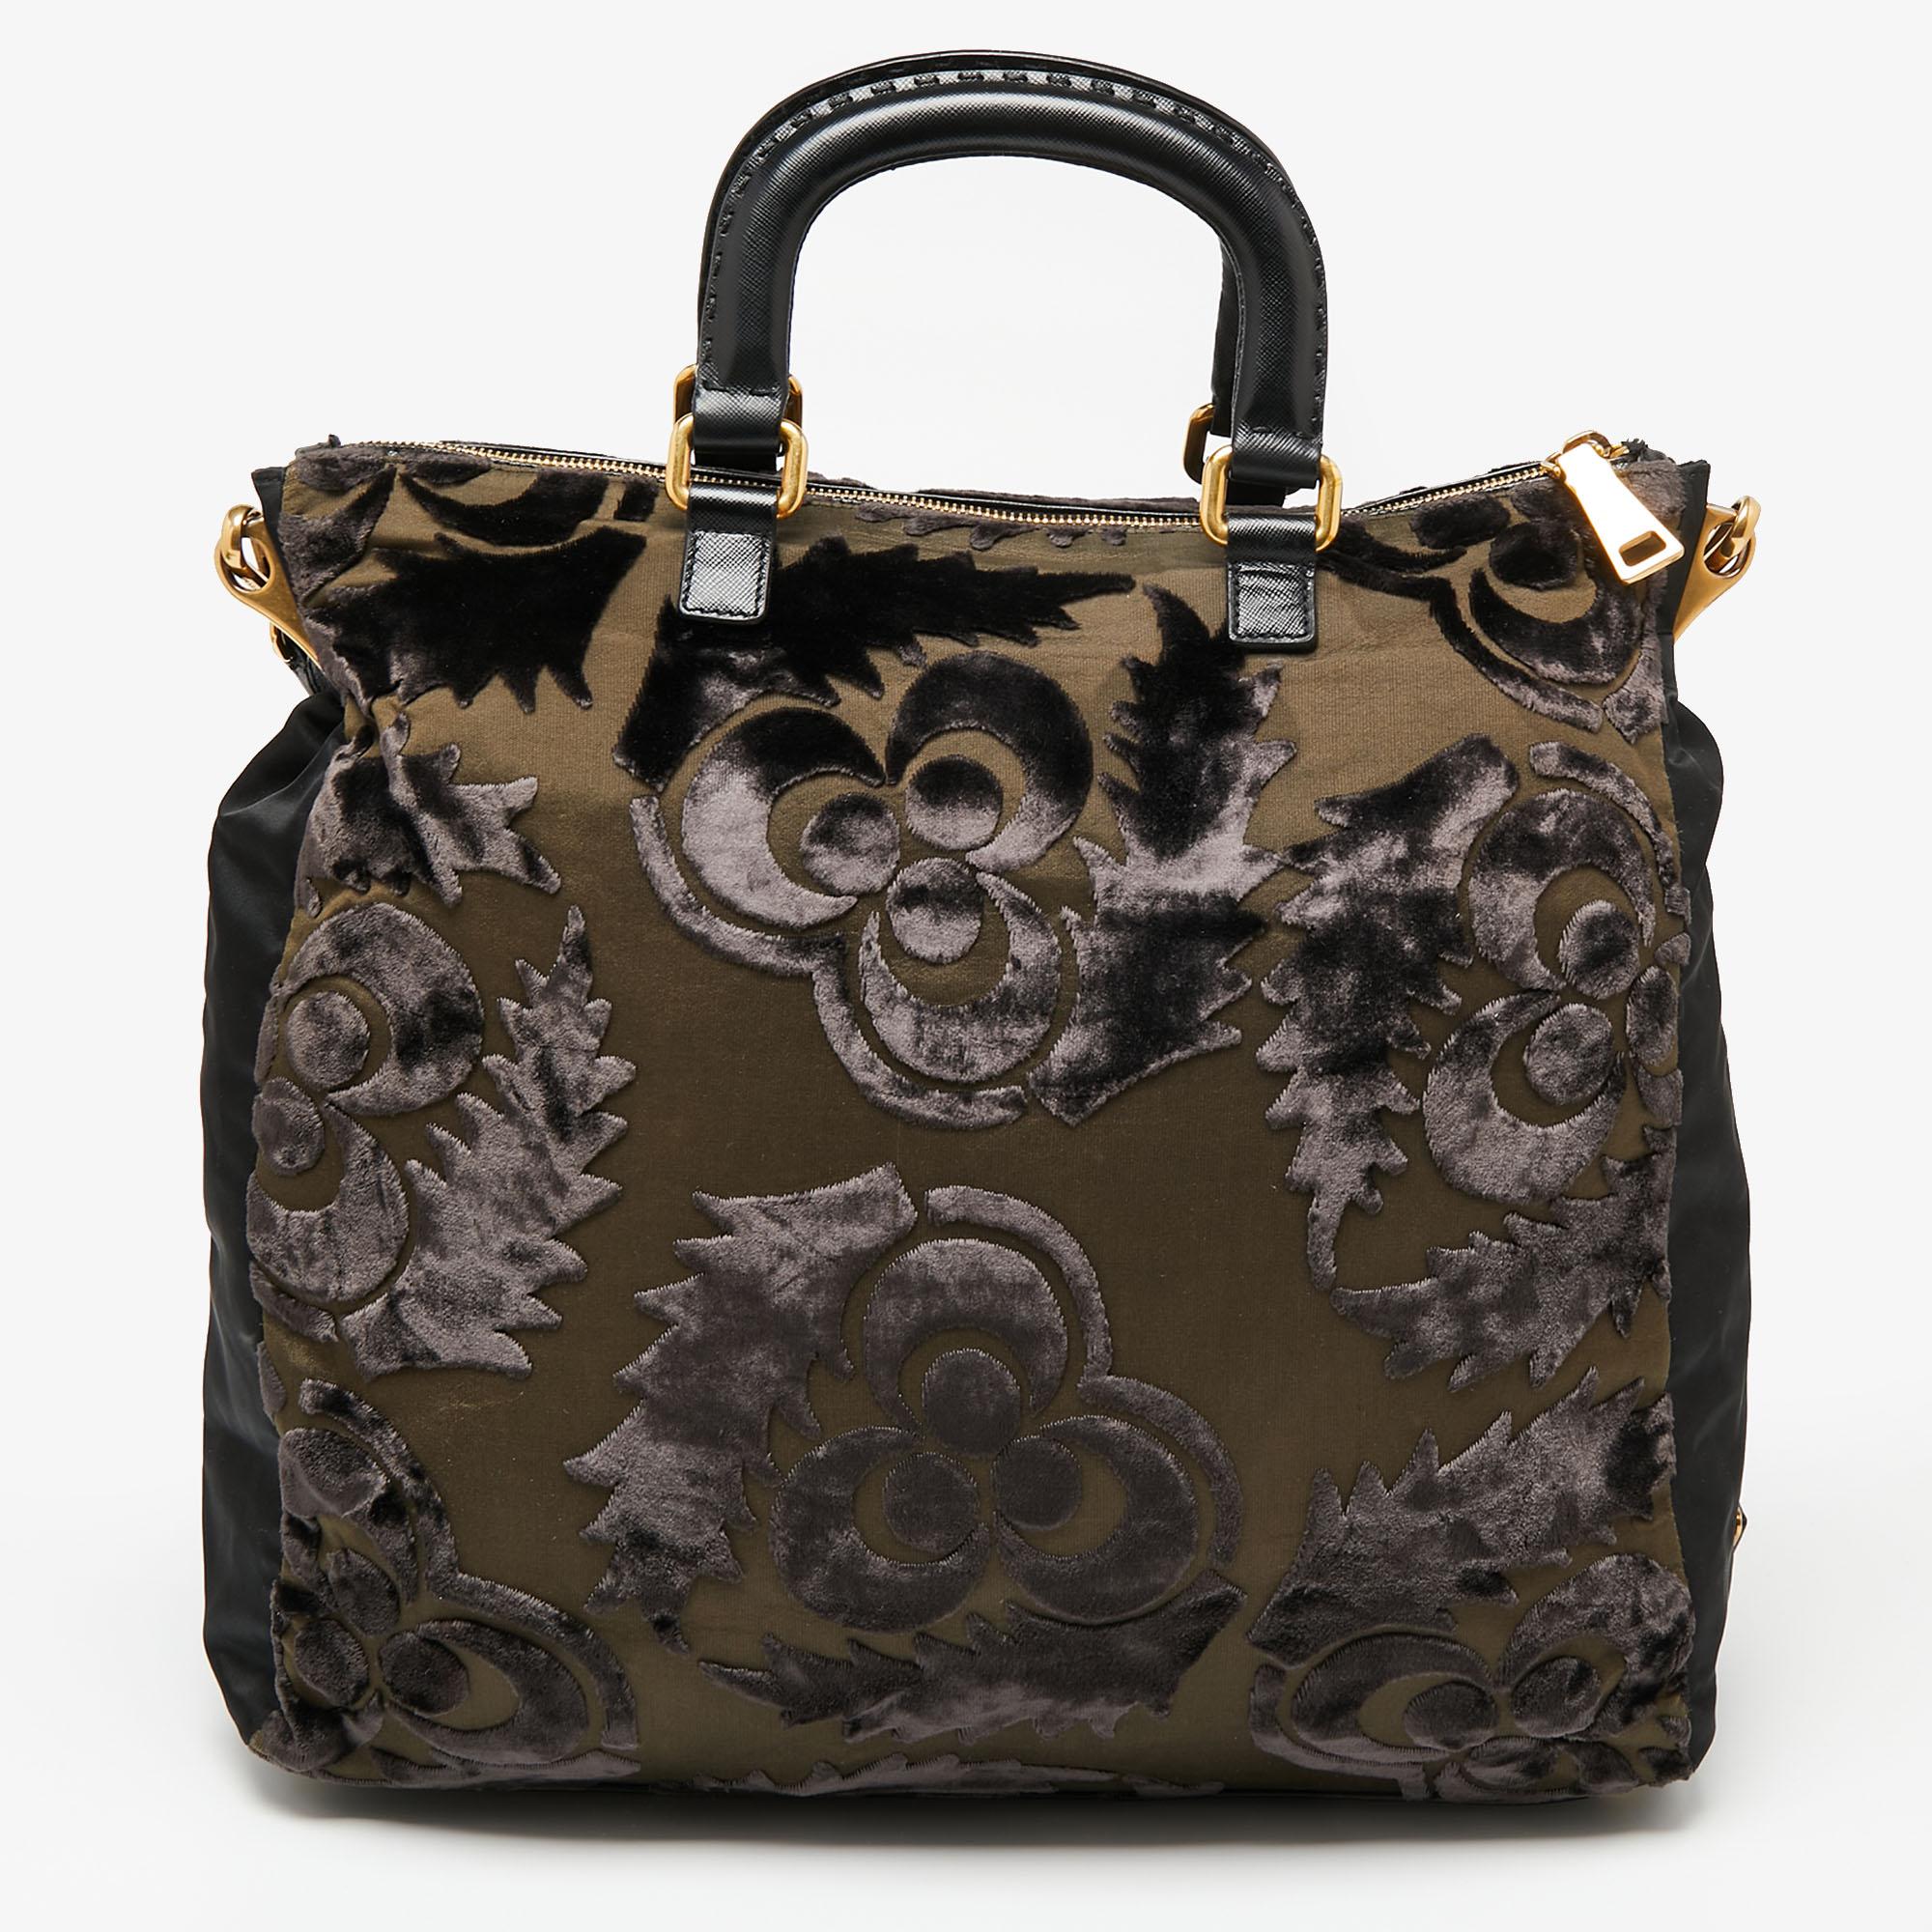 This Prada tote owns decorative detailing and functional details. Created from leather, nylon, and velvet, it is beautified with gold-tone hardware. The dual handling makes it easy to carry and the spacious nylon-lined interior can properly